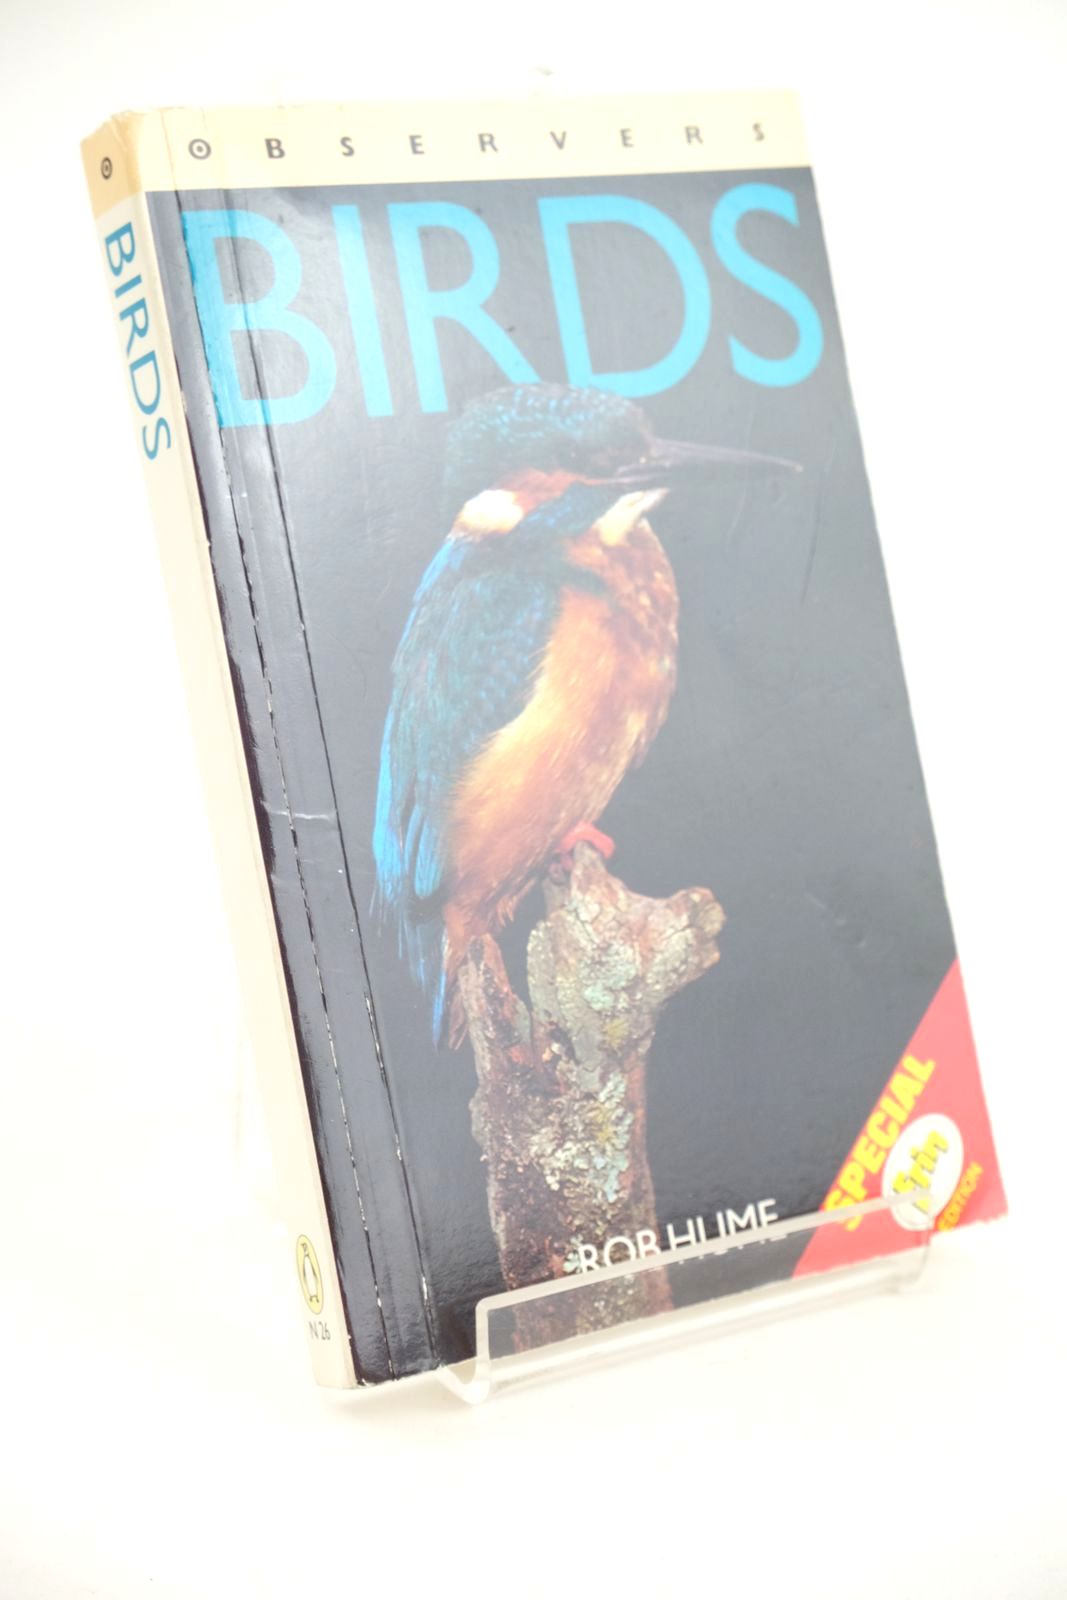 Photo of OBSERVERS BIRDS written by Hume, Rob published by Frederick Warne (STOCK CODE: 1323731)  for sale by Stella & Rose's Books